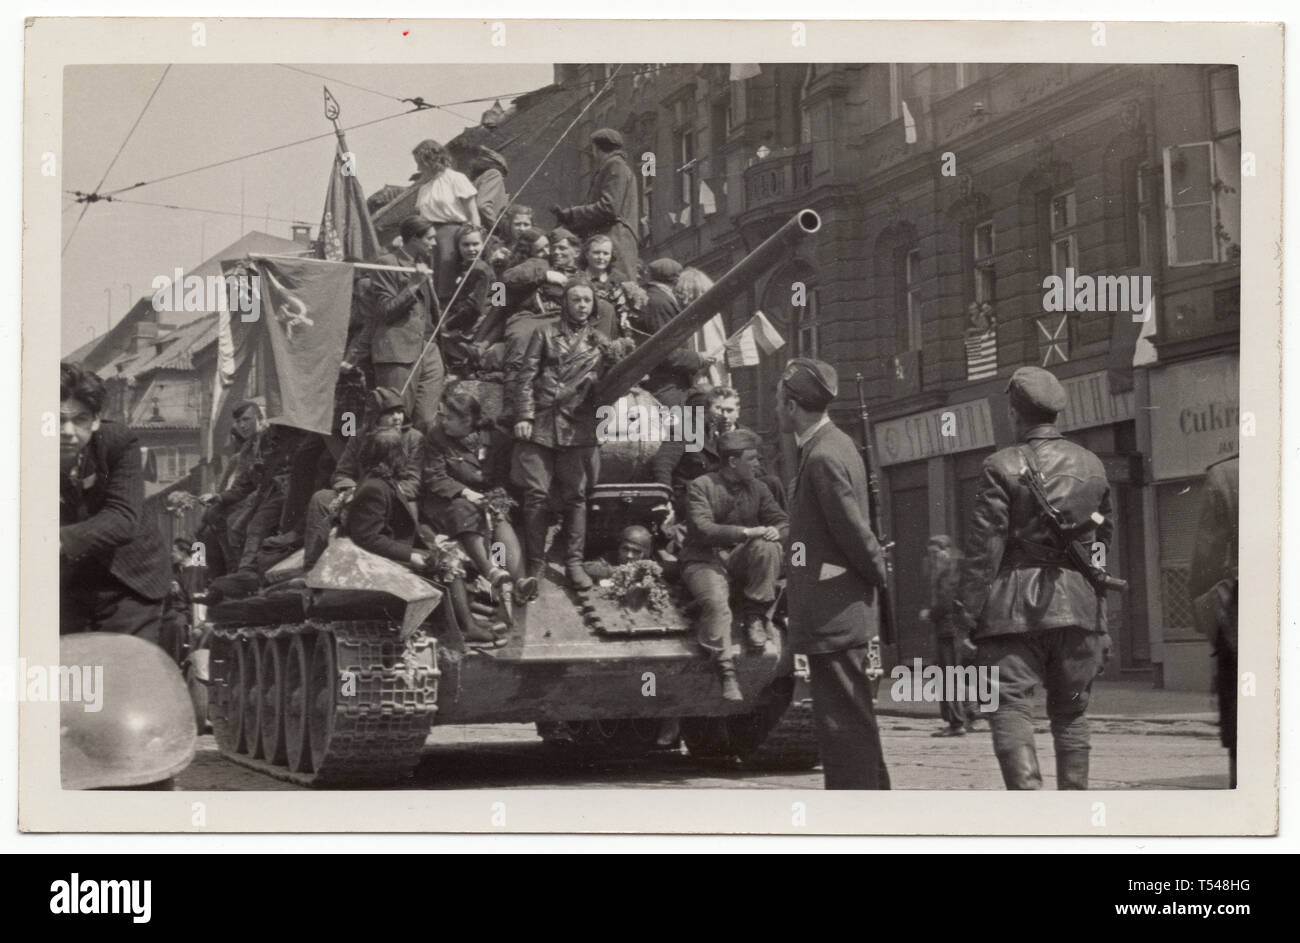 Red Army tank T-34 in Prague, Czechoslovakia, on 9 May 1945. Black and white vintage photograph by an unknown photographer taken in May 1945. Courtesy of the Azoor Photo Collection. Stock Photo